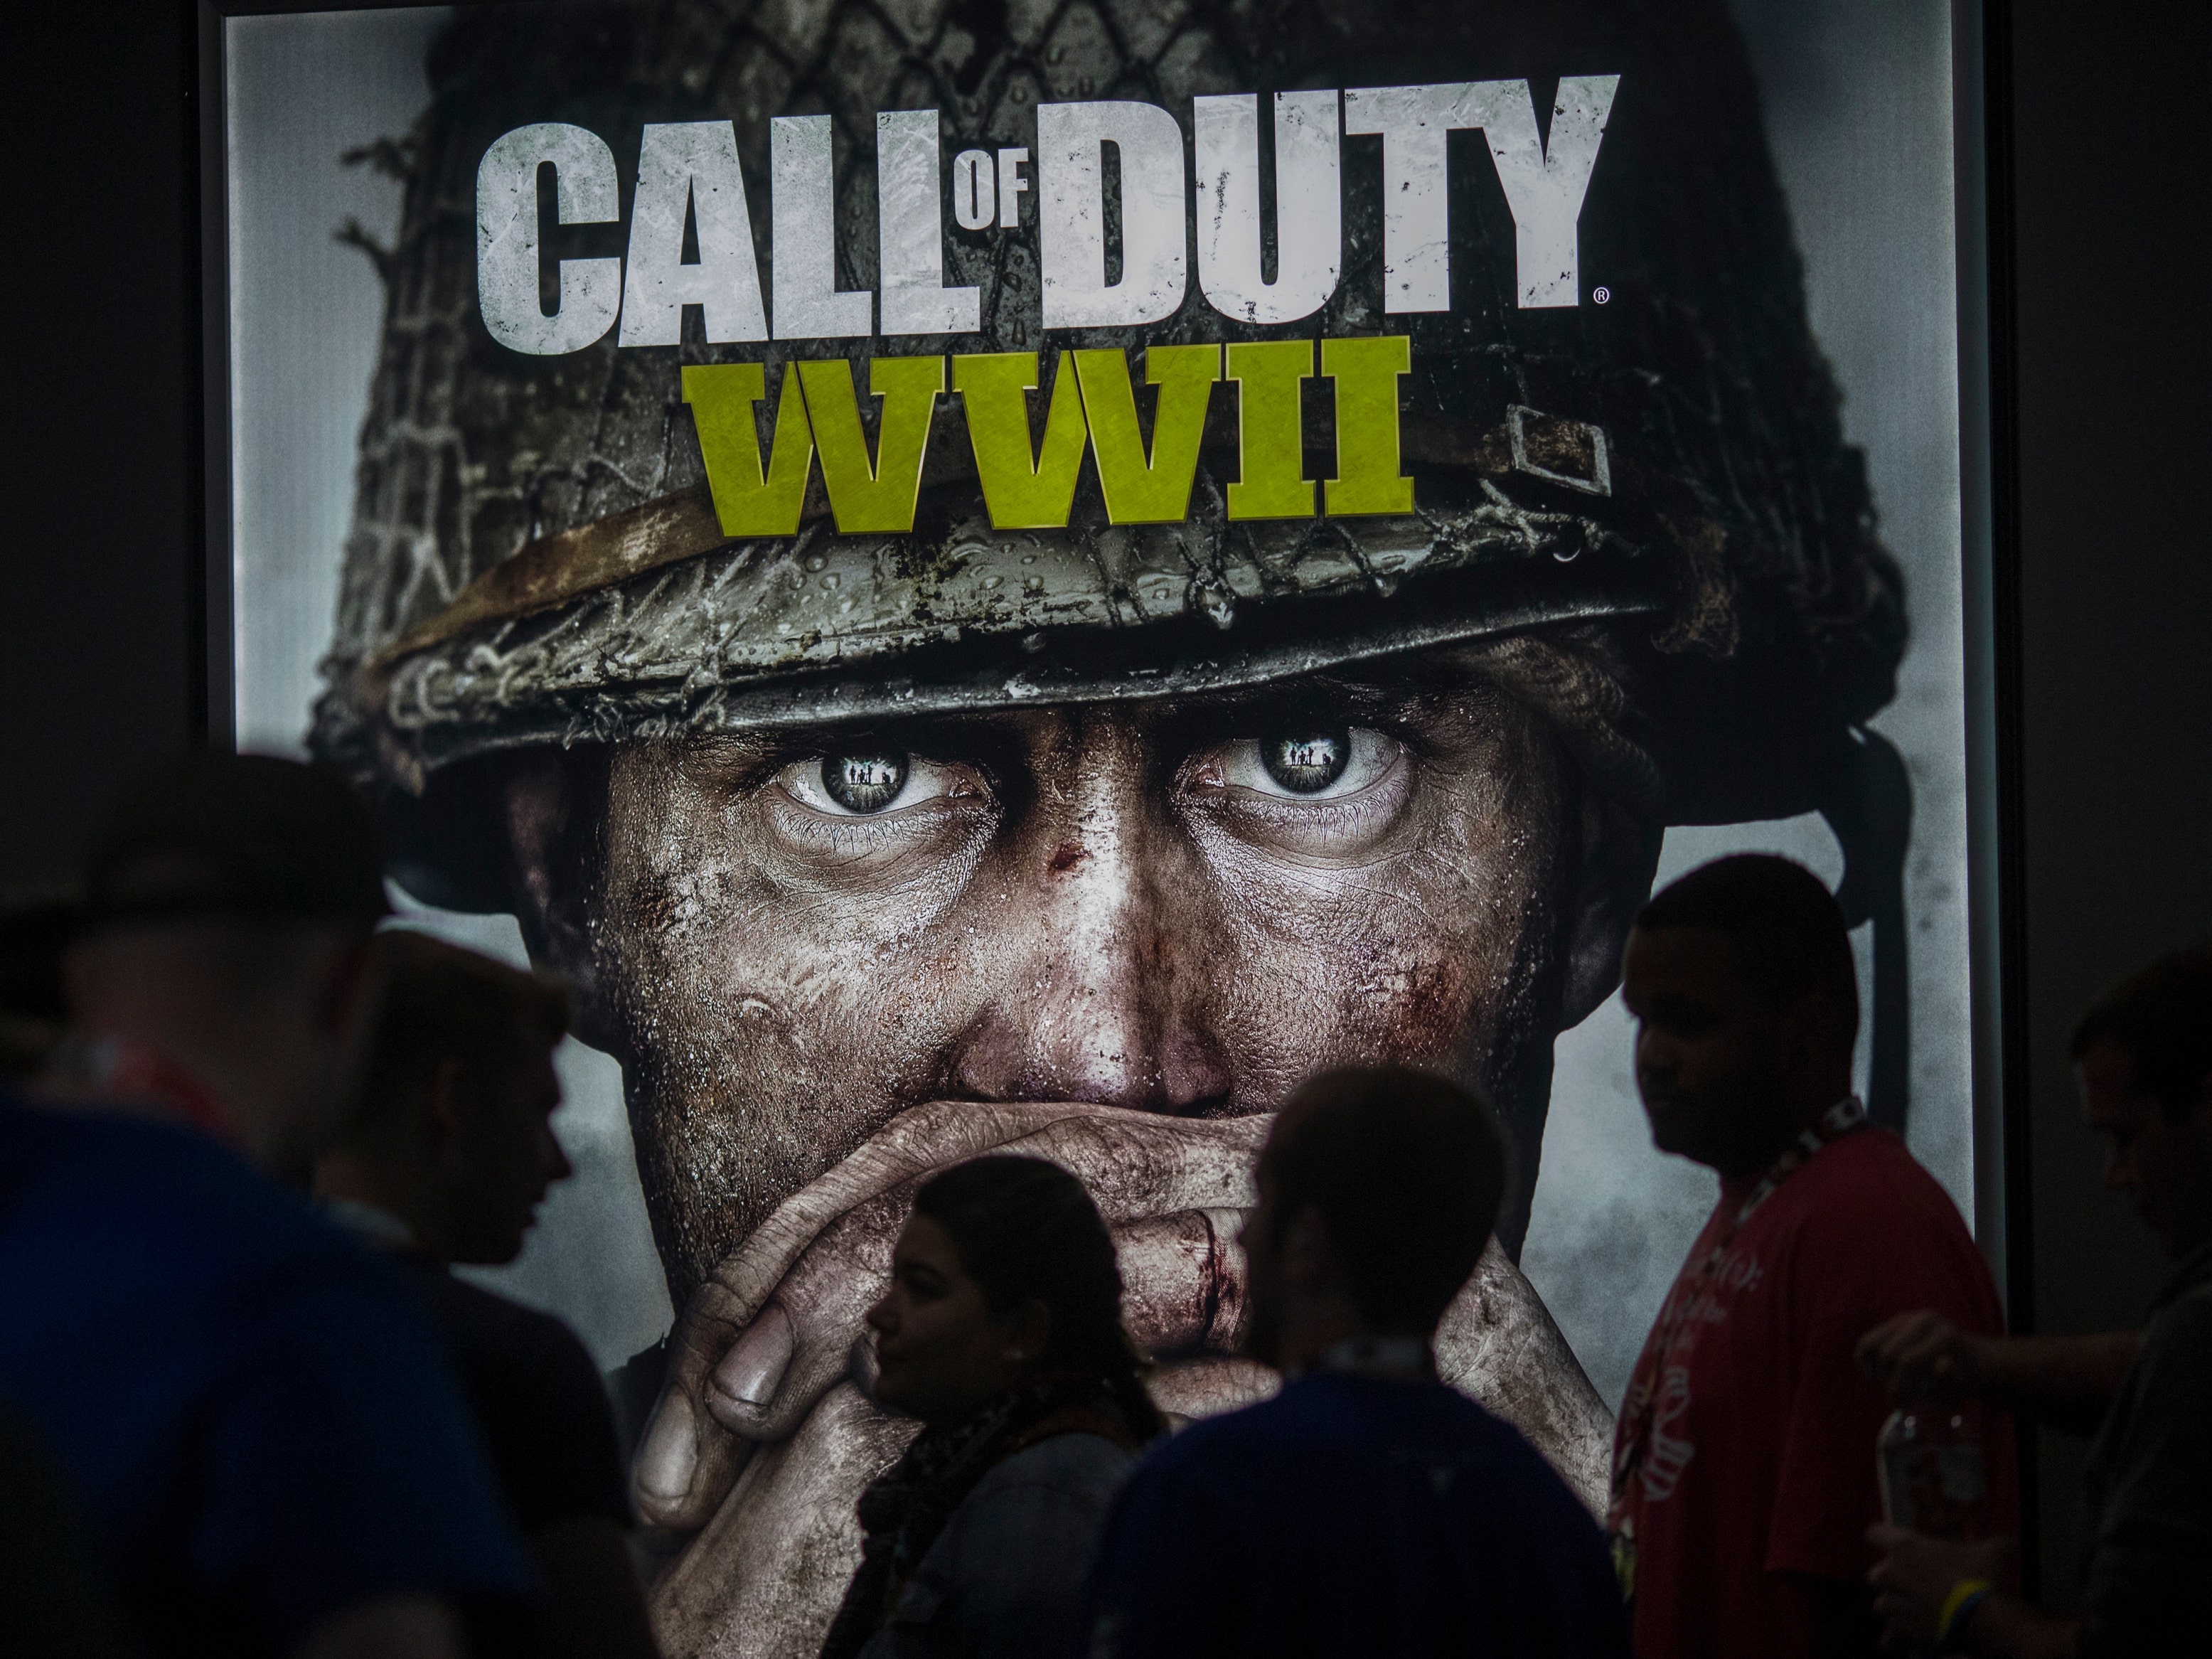 Why Activision Blizzard Stock Plunged 26% in 2018